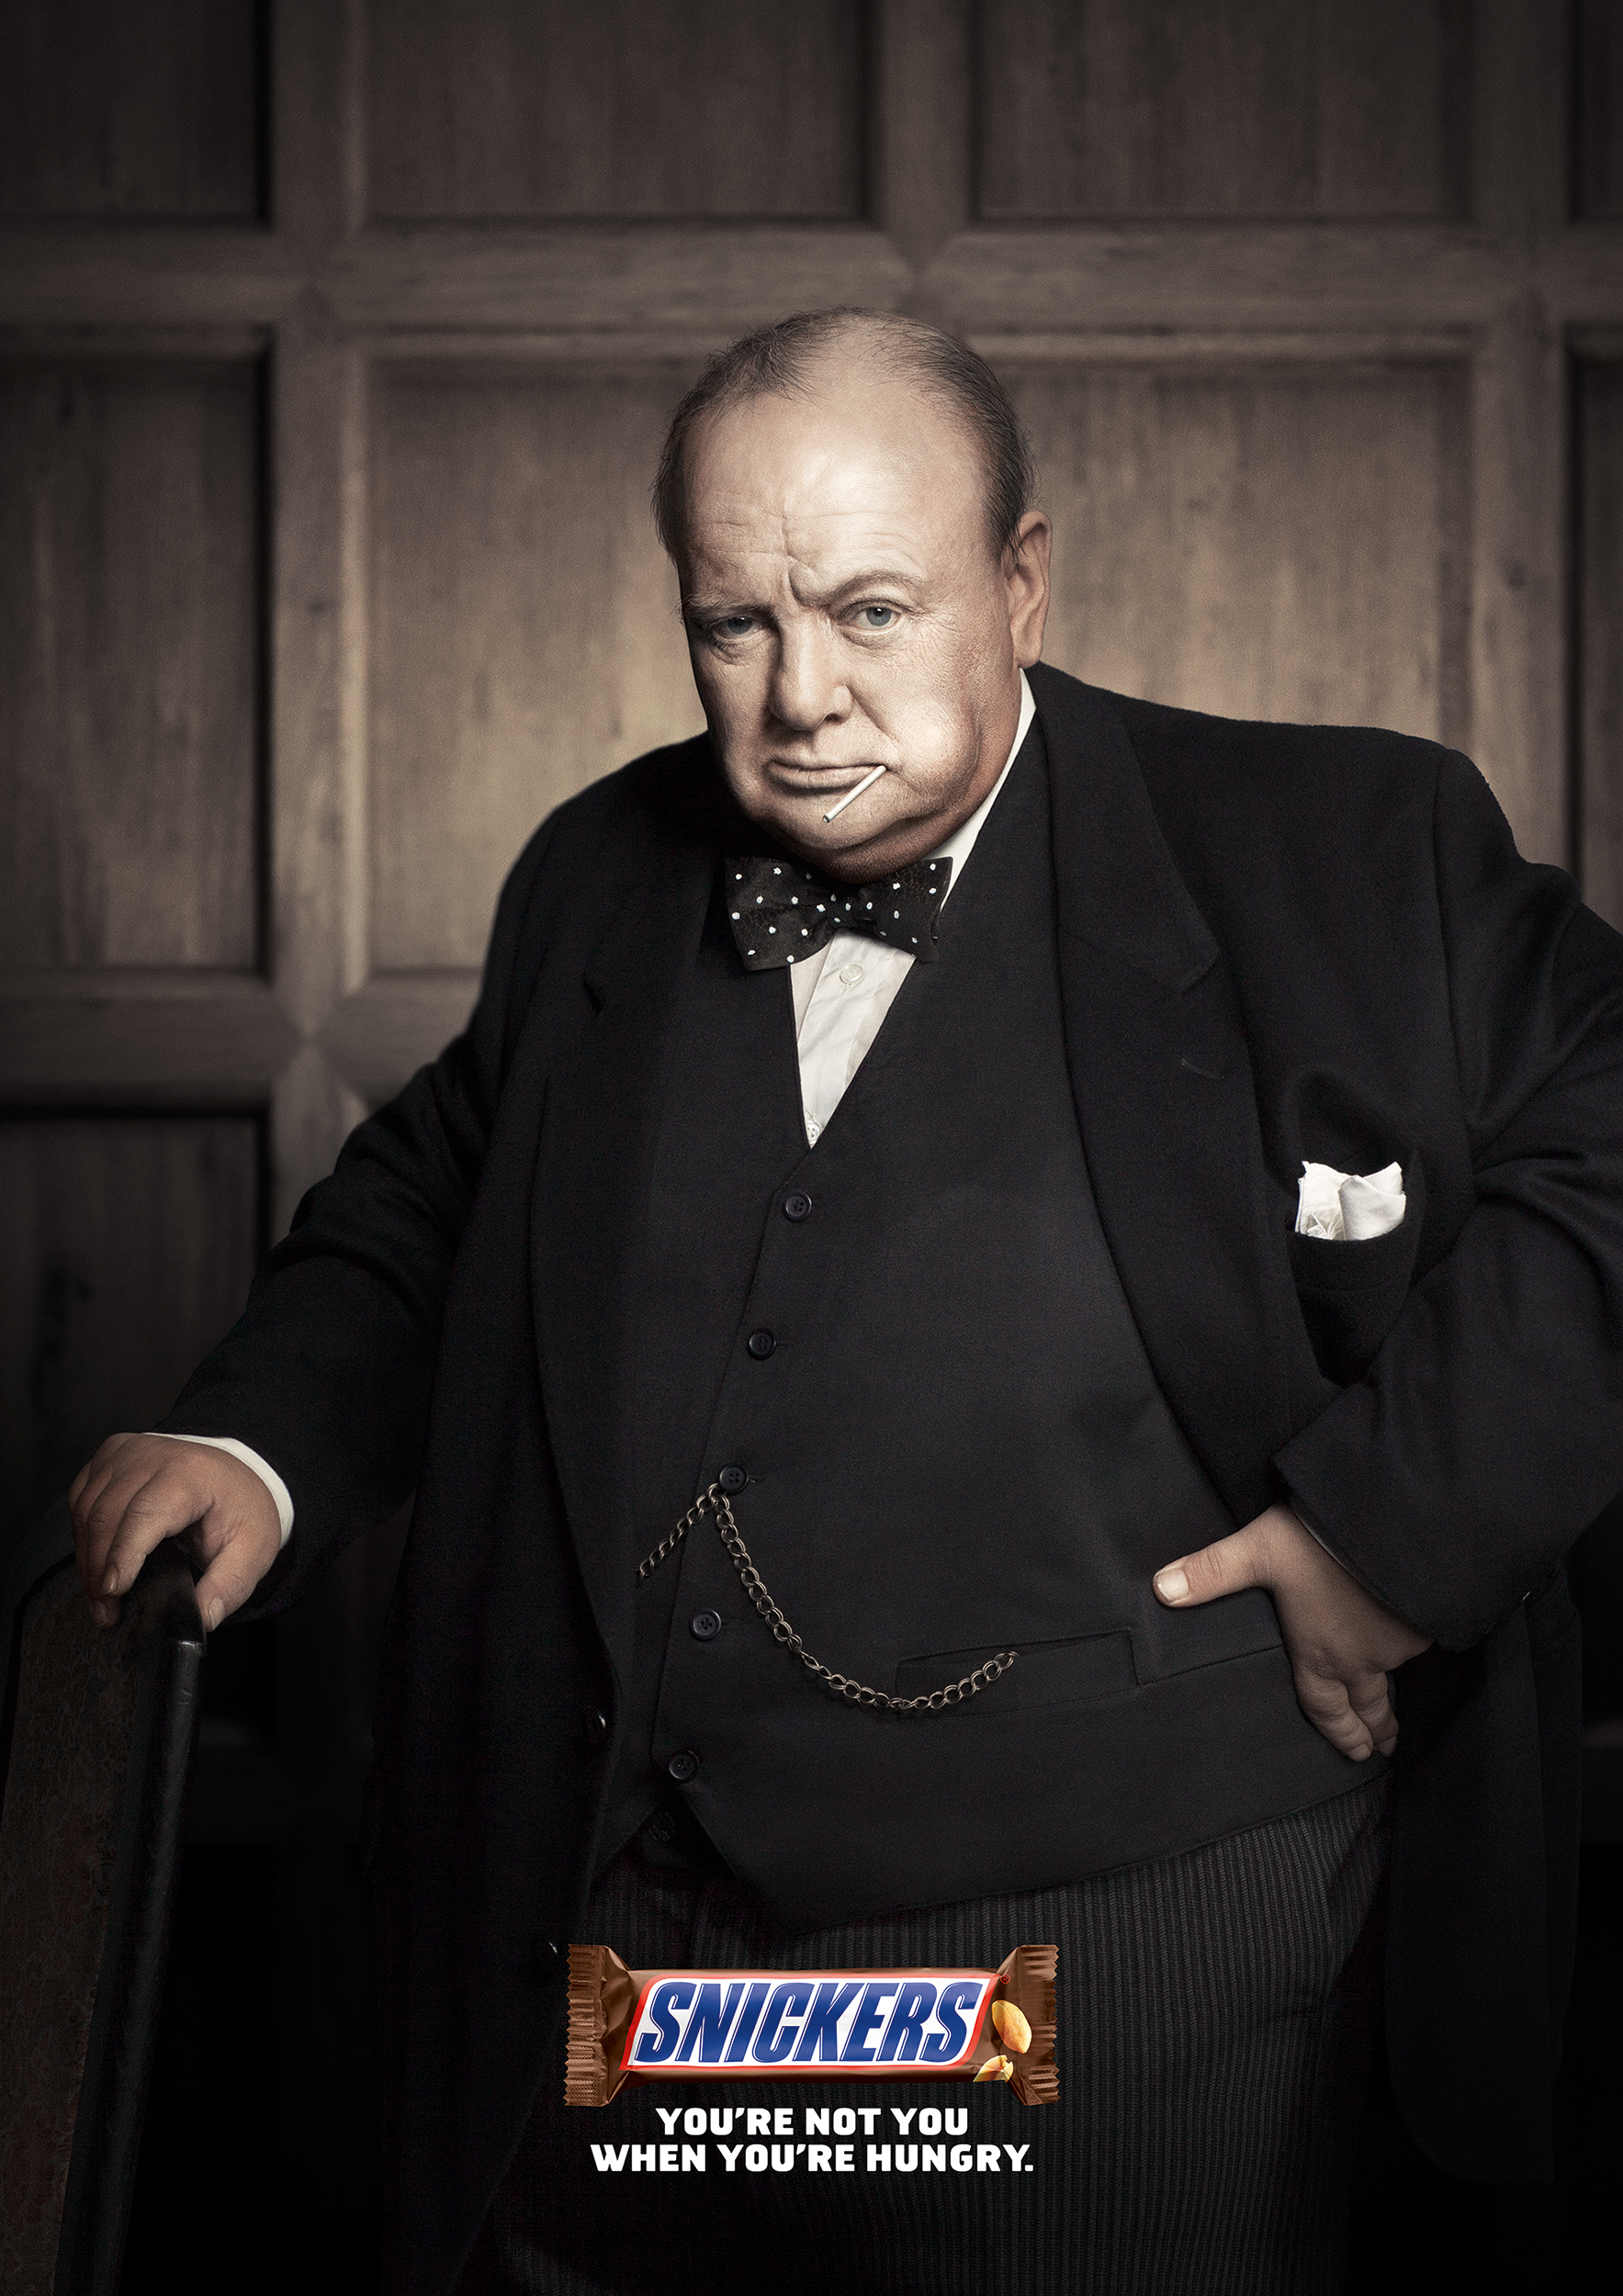 You’re not you: British Edition. Churchill